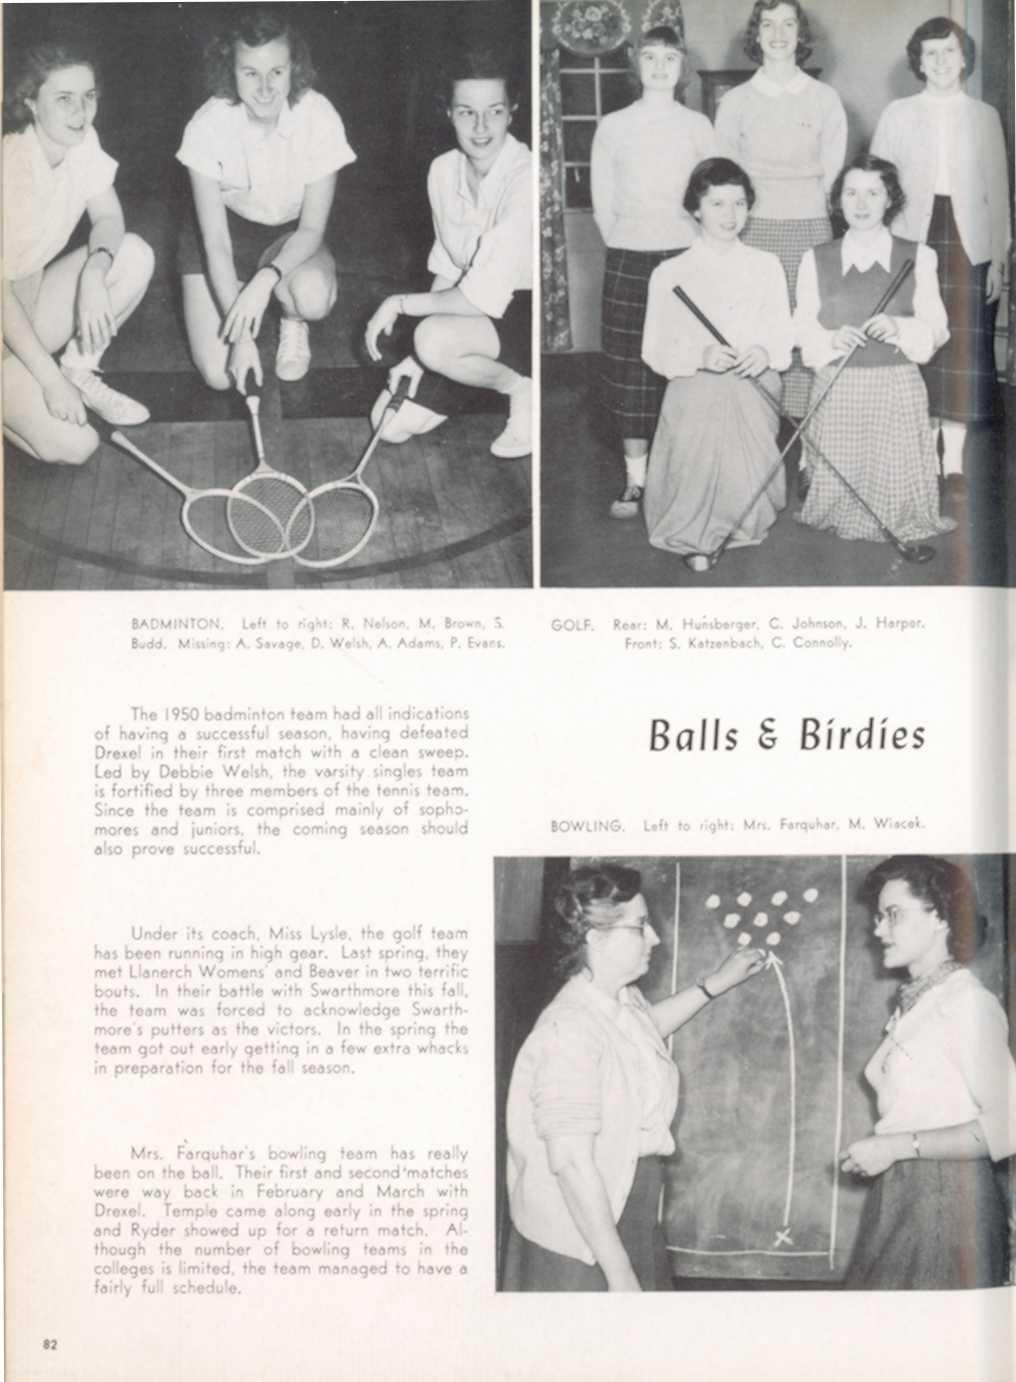 omores hmore's lthough Wiacek Budd BADMINTON: Missing: Left A to Savage, right:; D R Welsh, Nelson, A Adams, M Brown, P Evans S The 1950 badminton team had all indication s of having a successful